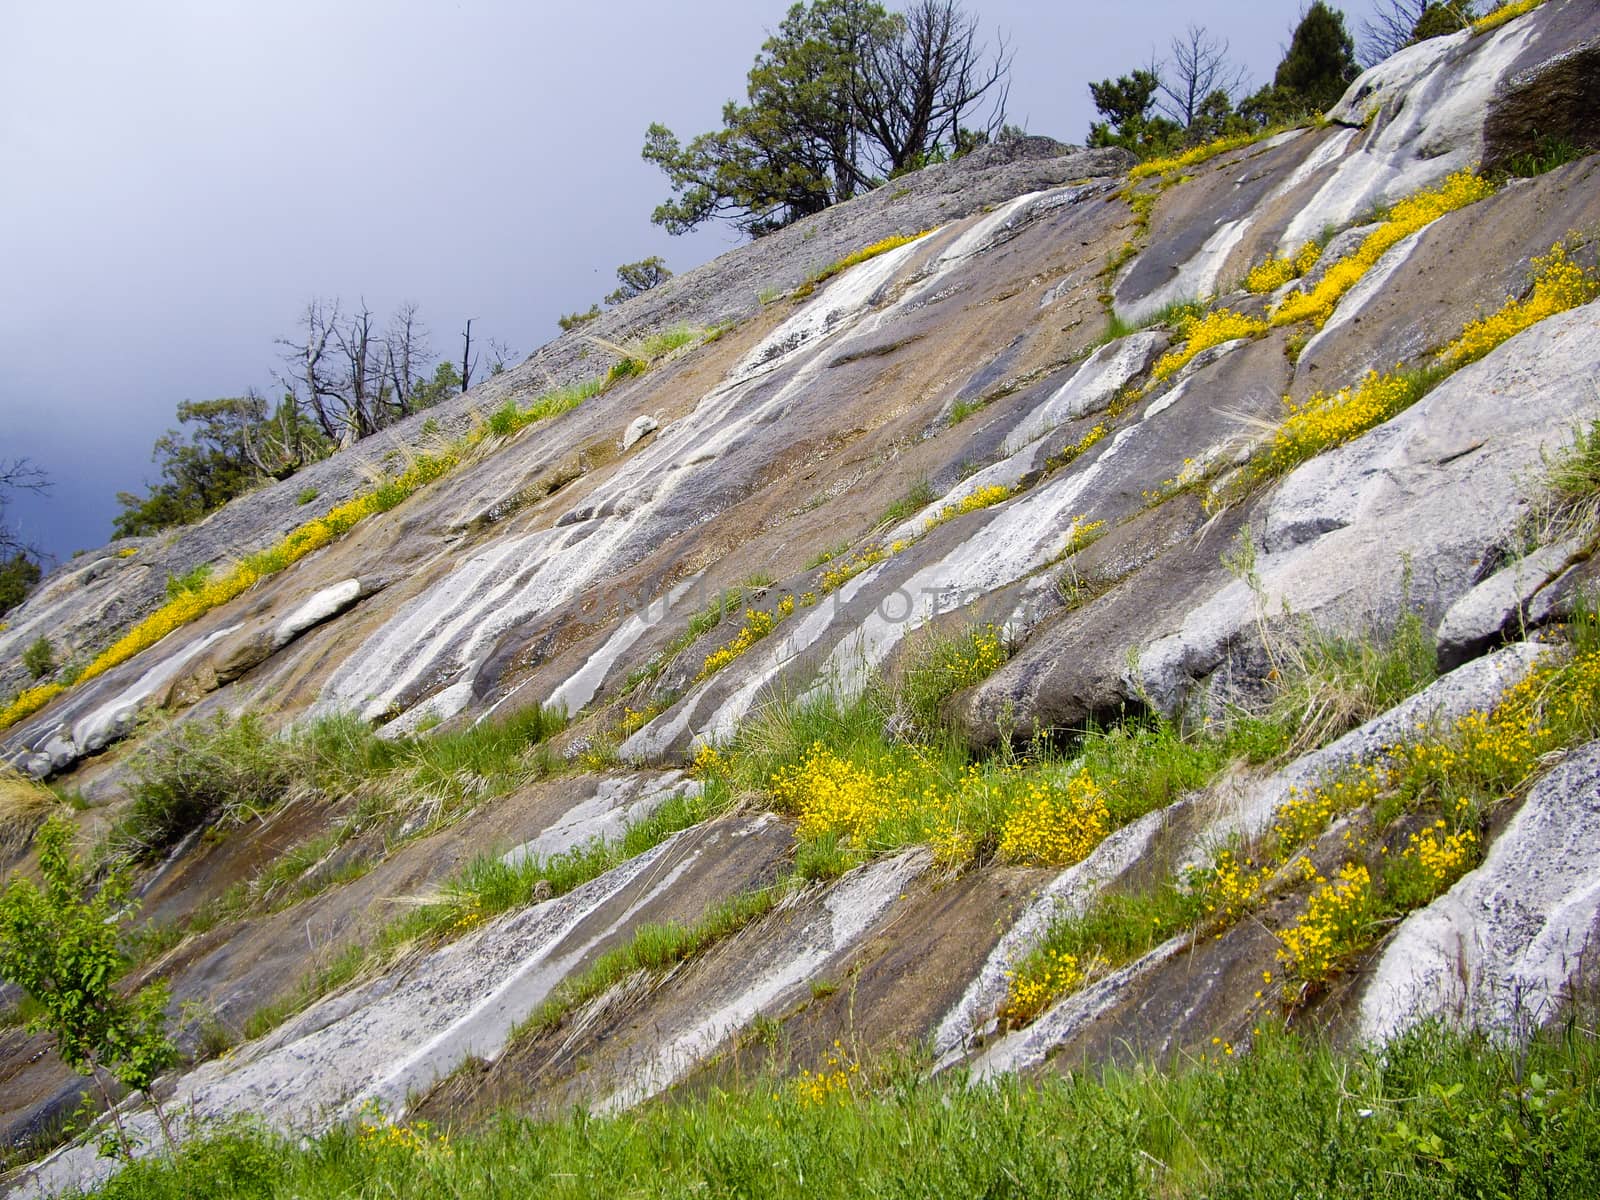 Flowers on rock slopes in Summer at Yellowstone National Park